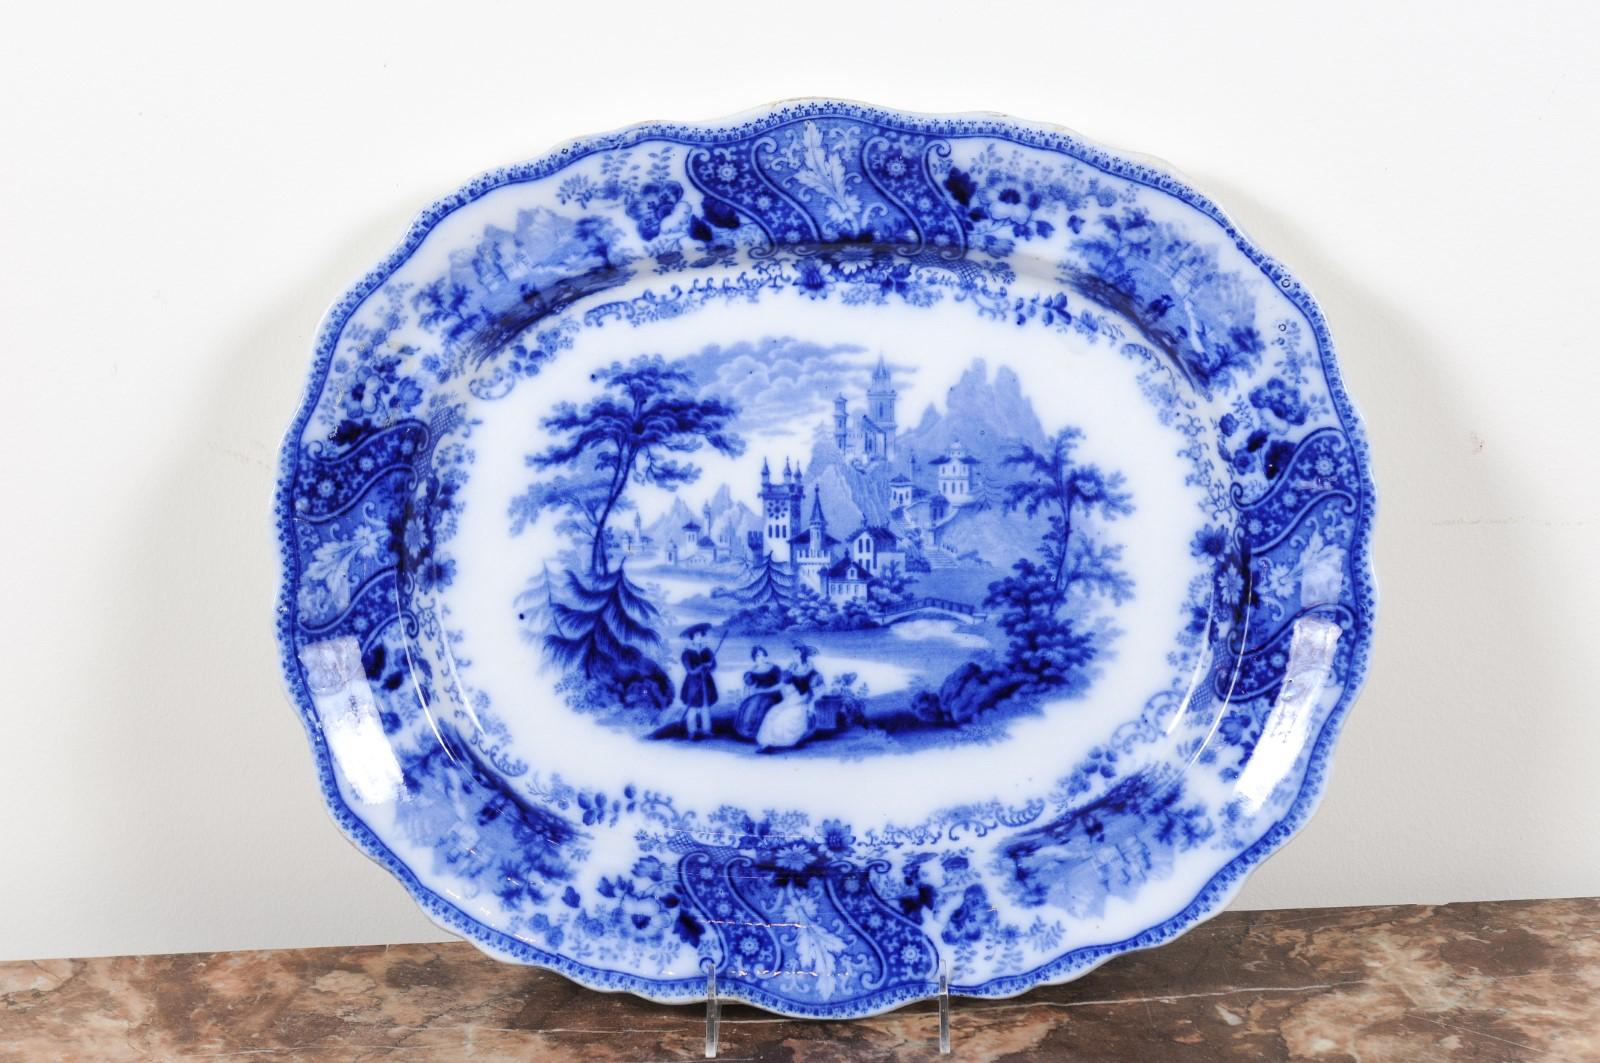 An English Burgess & Leigh Middleport Nonpareil pattern flow blue platter from the late 19th century, with outdoor scenery and scalloped edge. Born in the Middleport pottery during the late 19th, early 20th century and created by Burgess & Leigh,